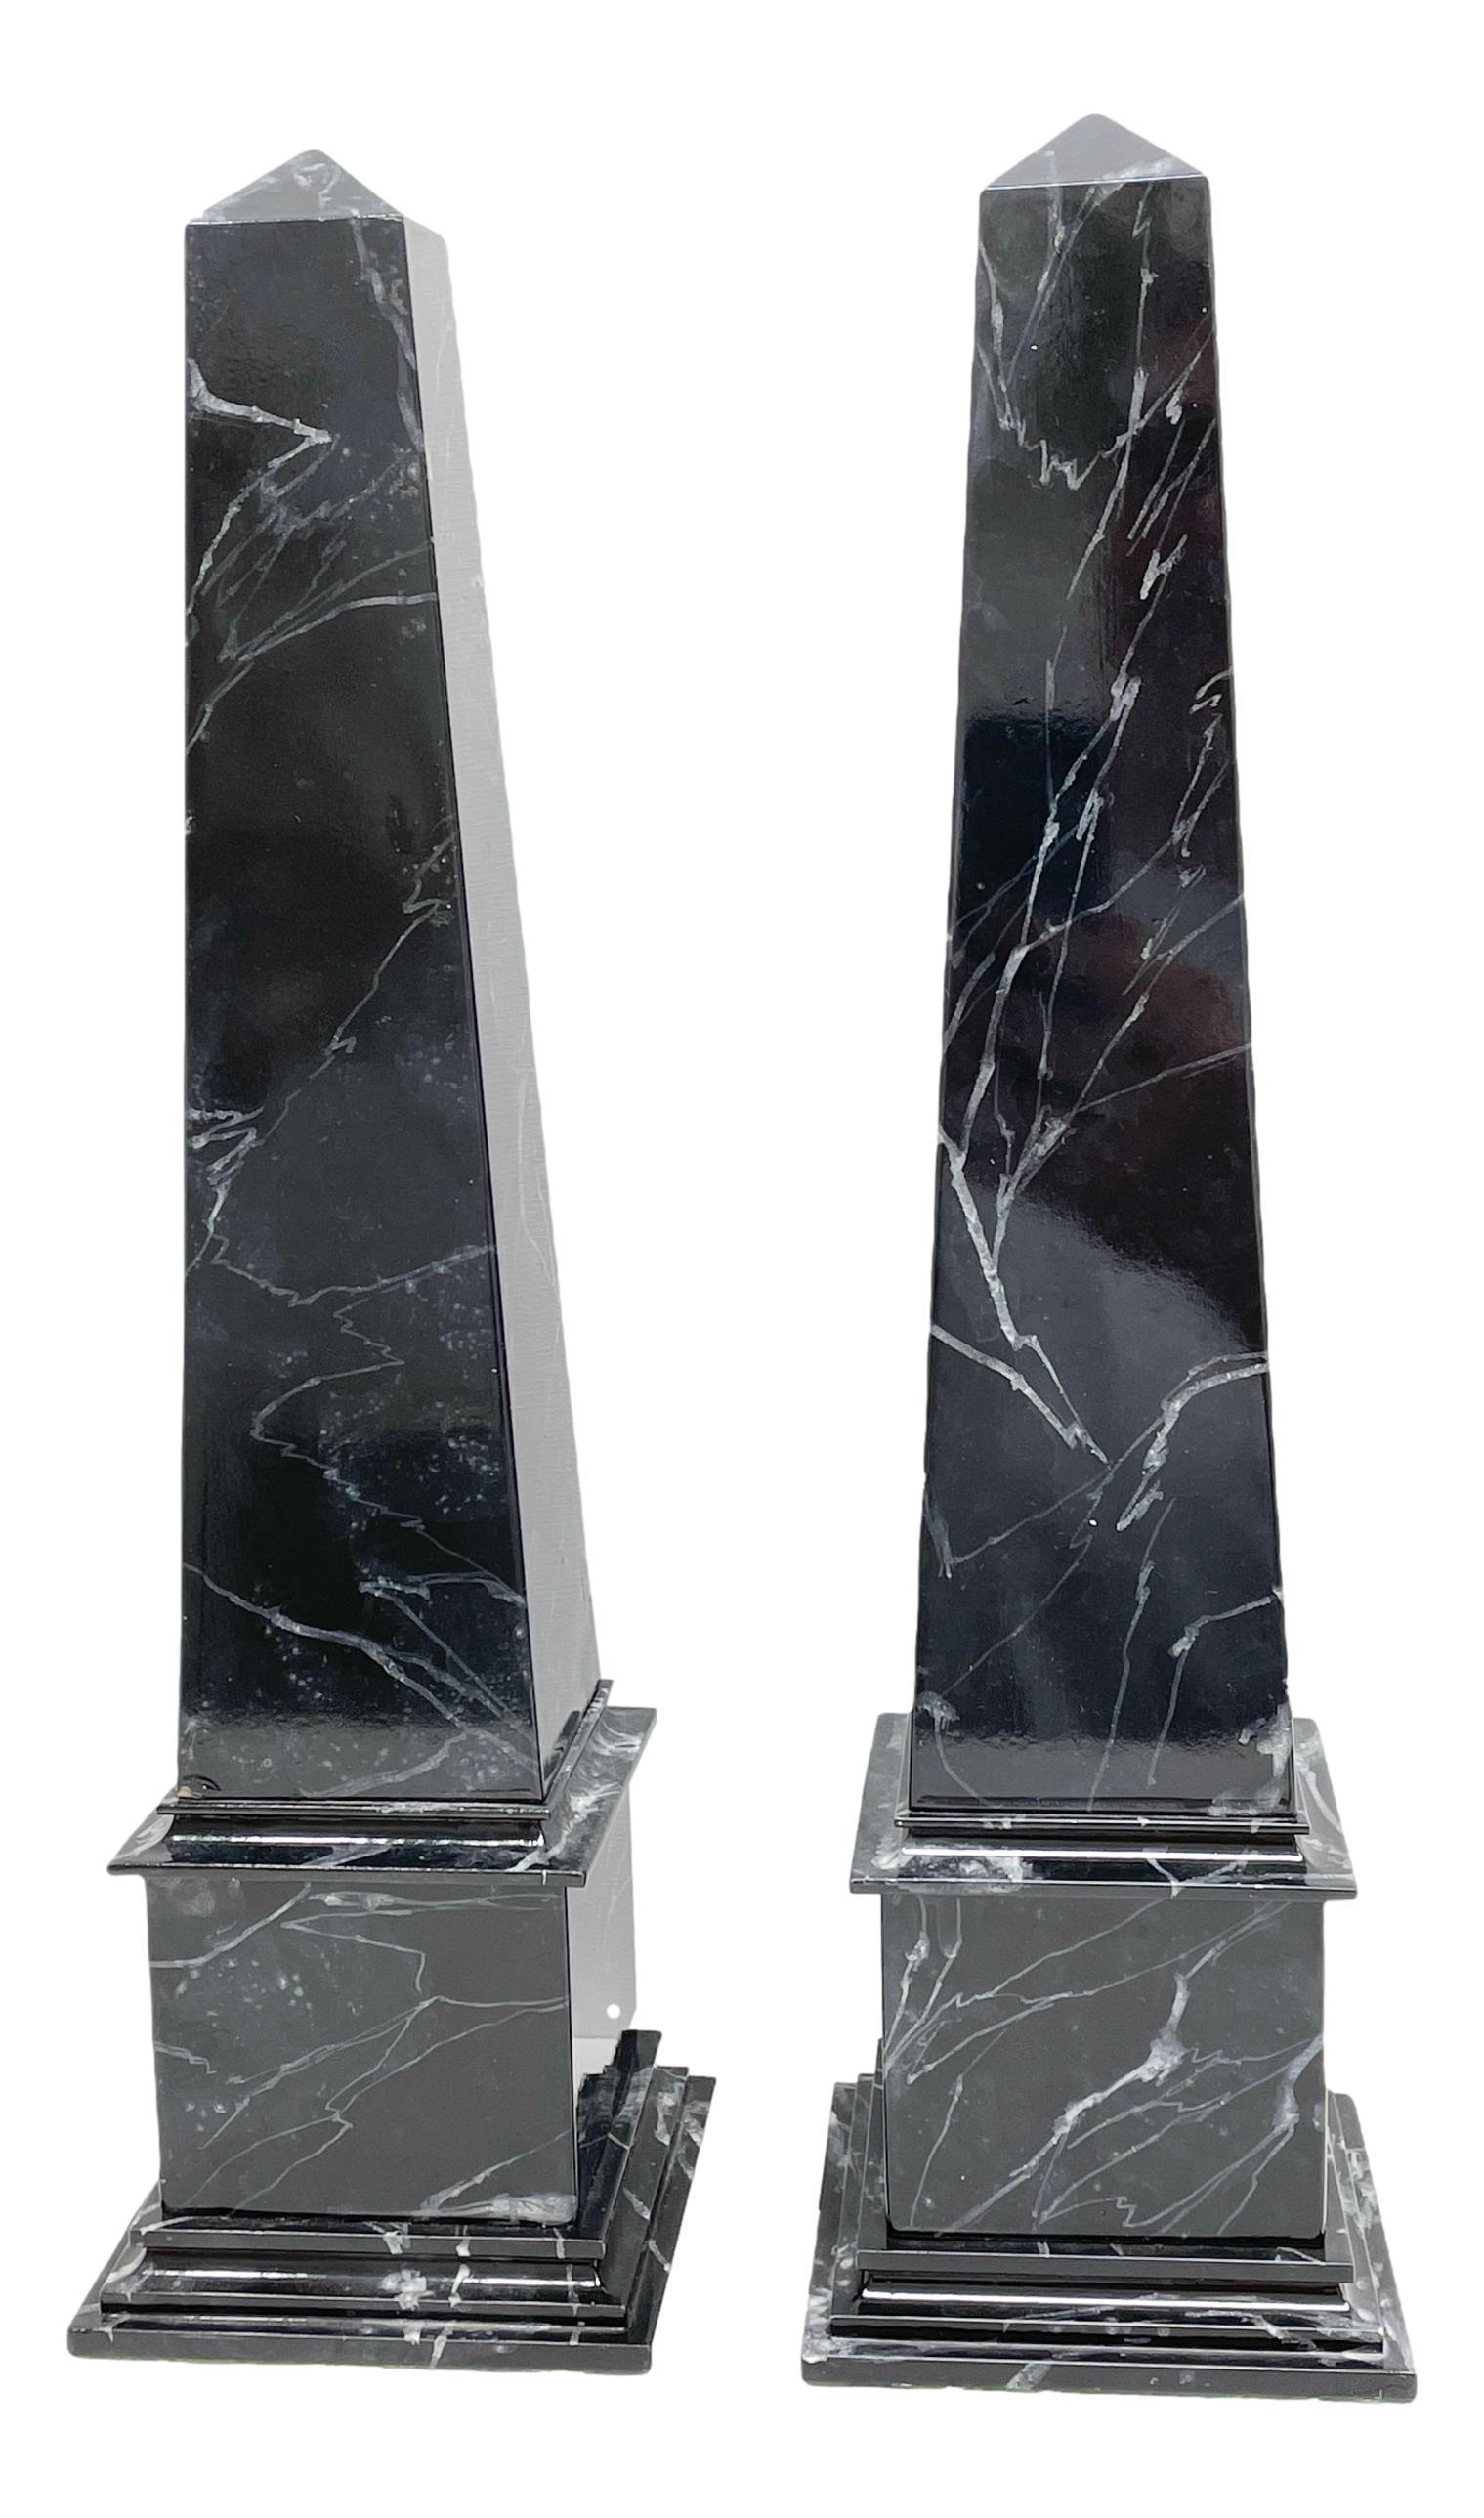 This beautiful pair of 1900s Austrian obelisk will make a definite statement with their classic form and use of black and white marble finish. Handcrafted from wood with a lacquered marble finish. A nice addition to any room. Rare and hard to find.